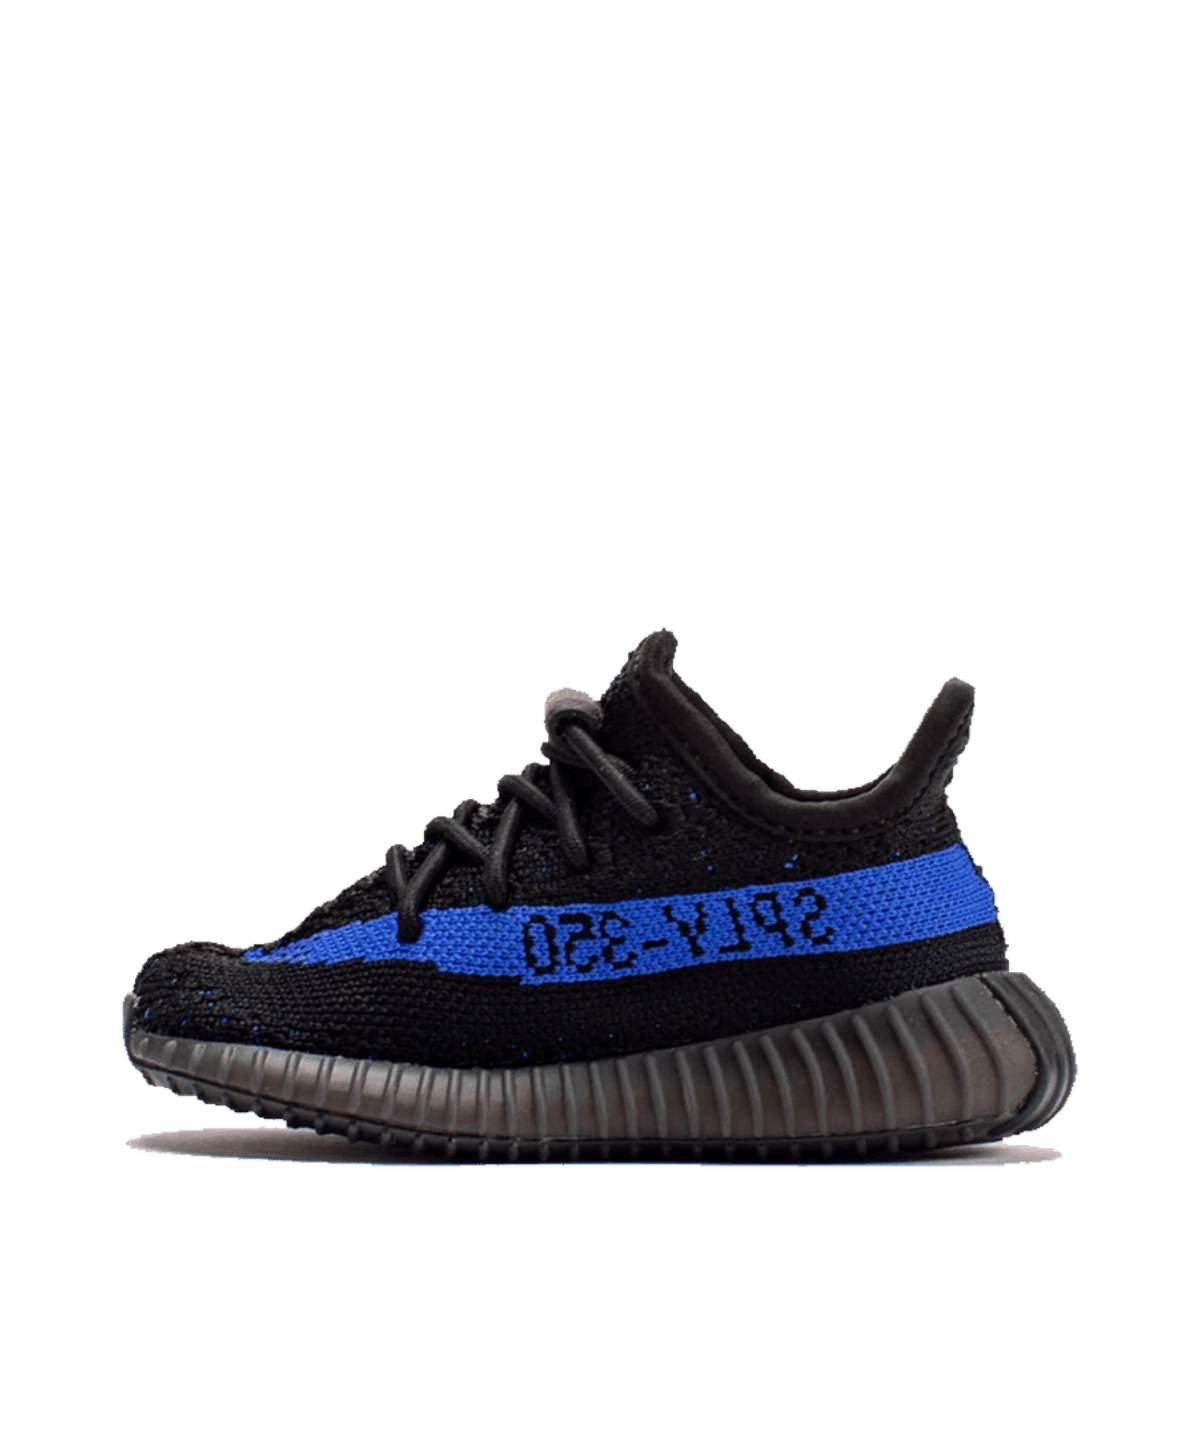 Adidas Yeezy Boost 350 V2 Kids 'Dazzling Blue' SIDE VIEW